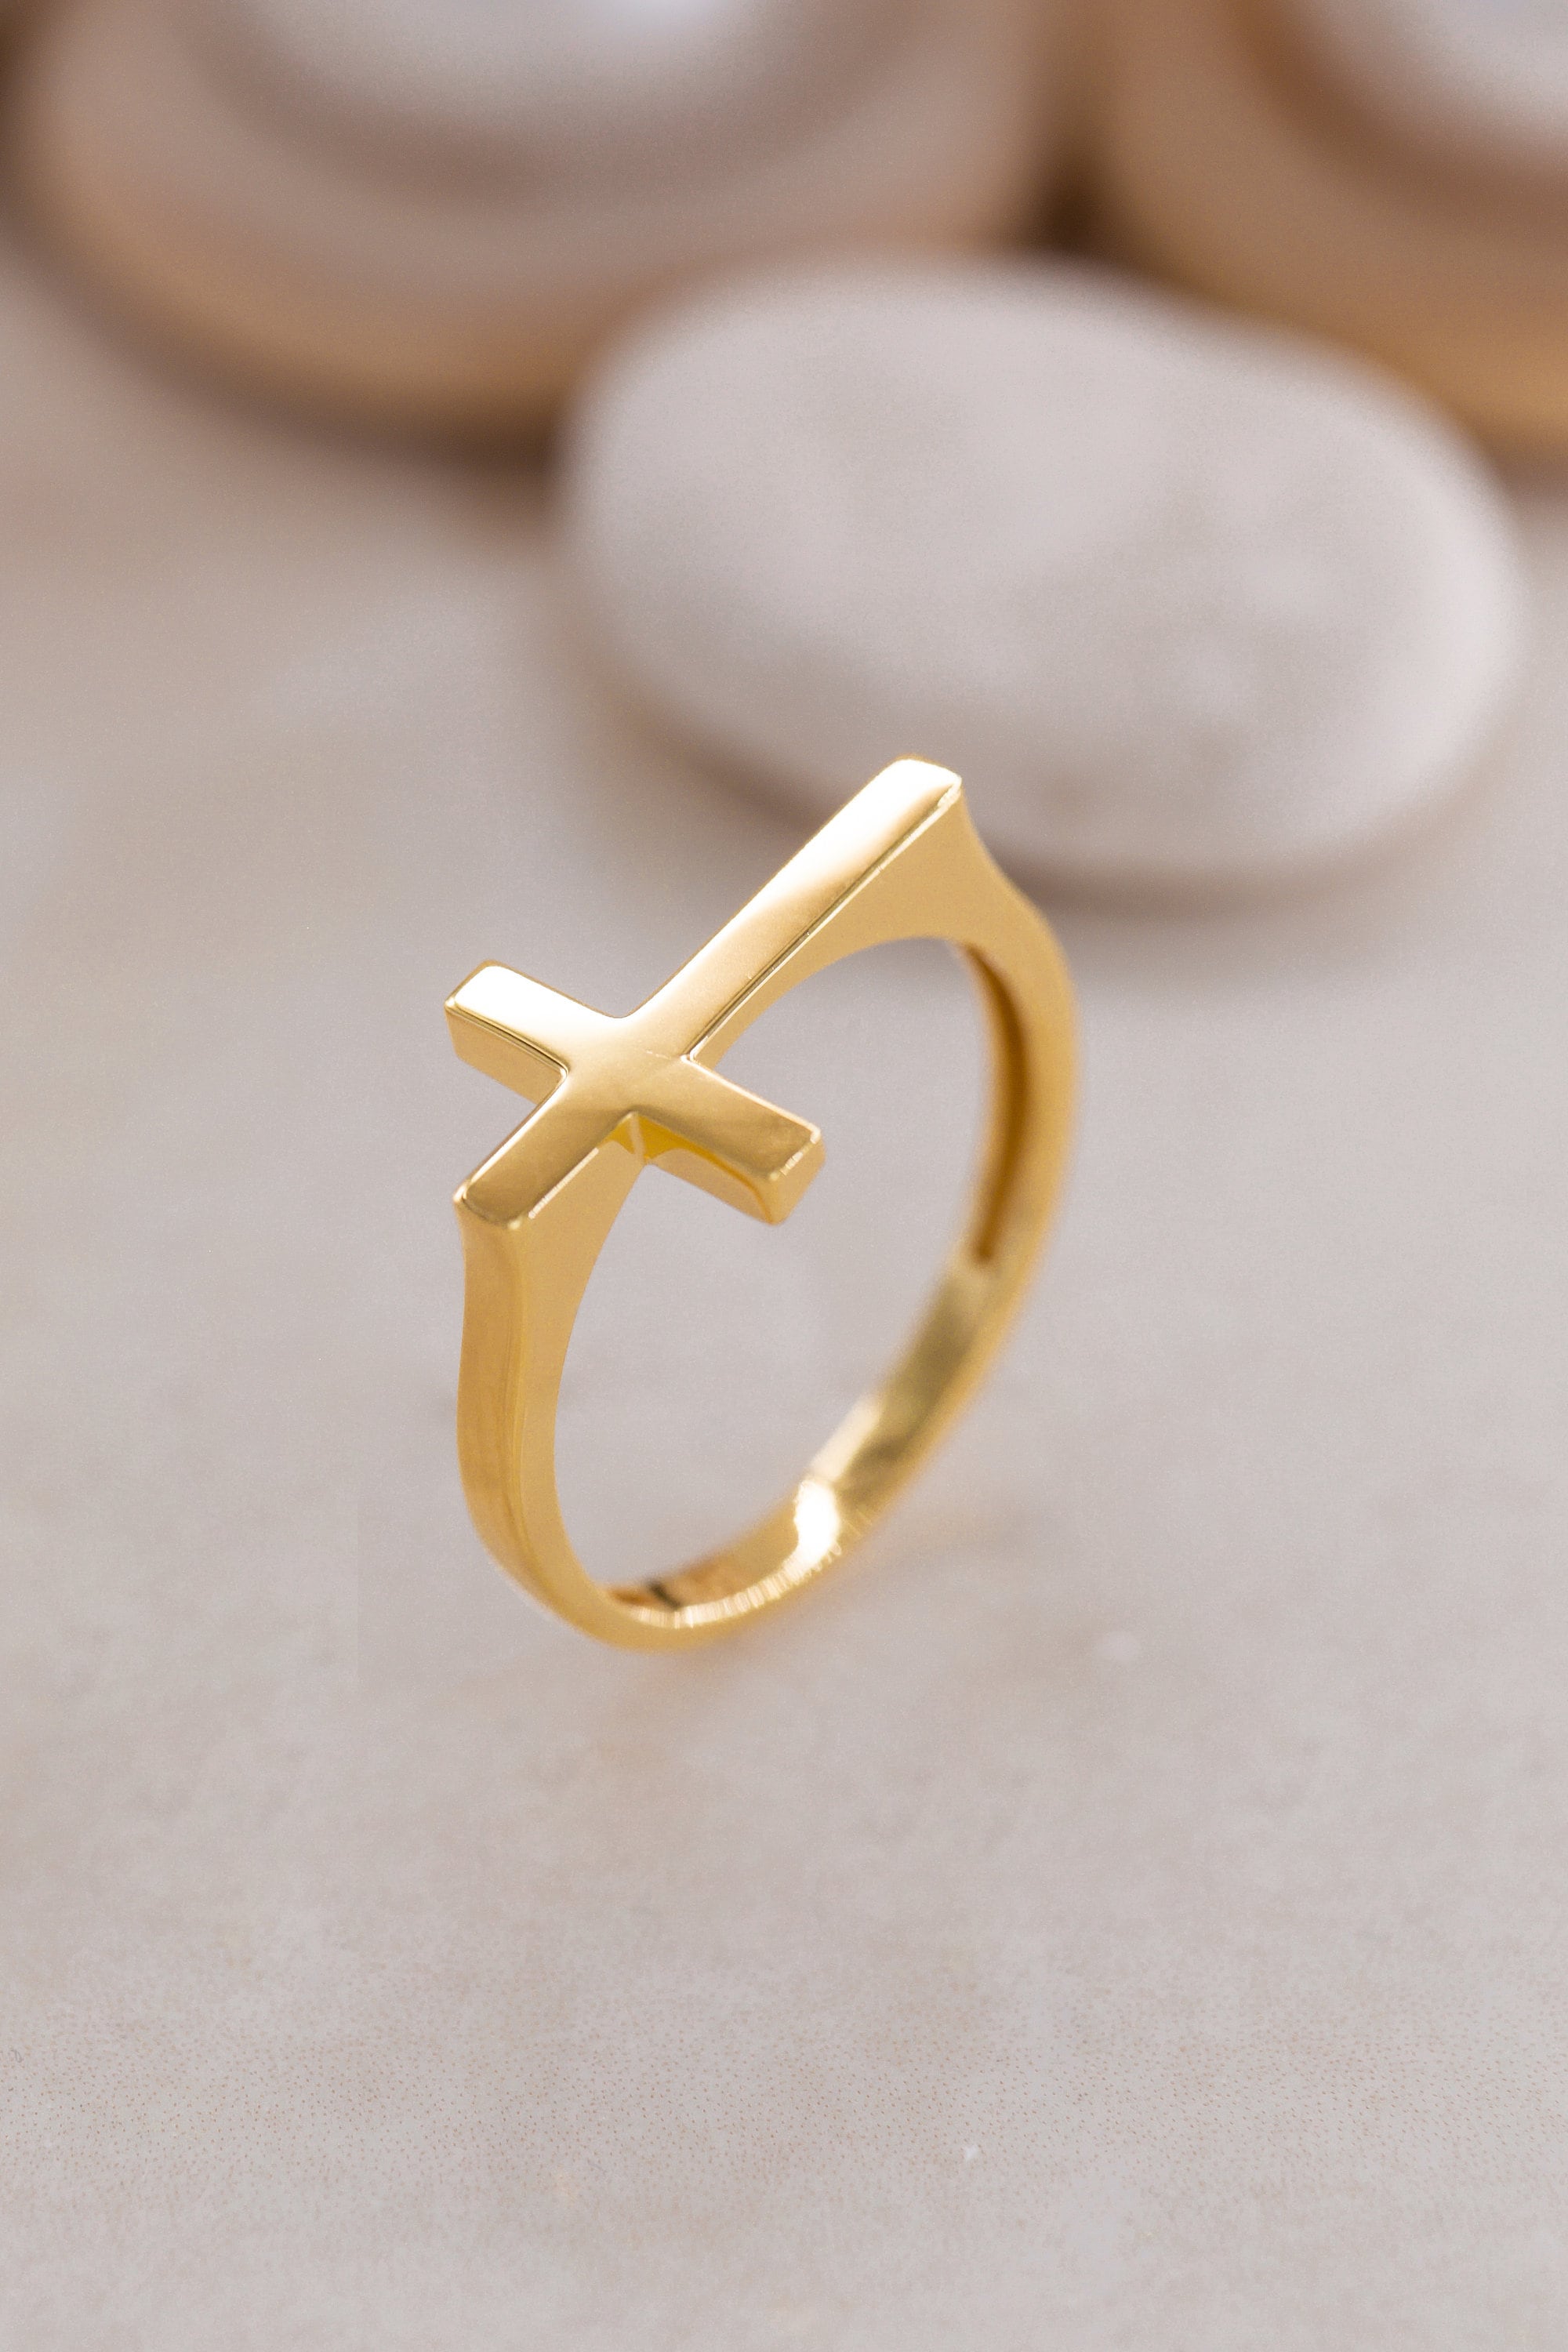 14K Gold Plain Cross Ring, Religious Symbol Ring, 925 Silver Religious Ring Gift, Jesus Ring, Faith-Inspired Jewelry, Religious Accessories